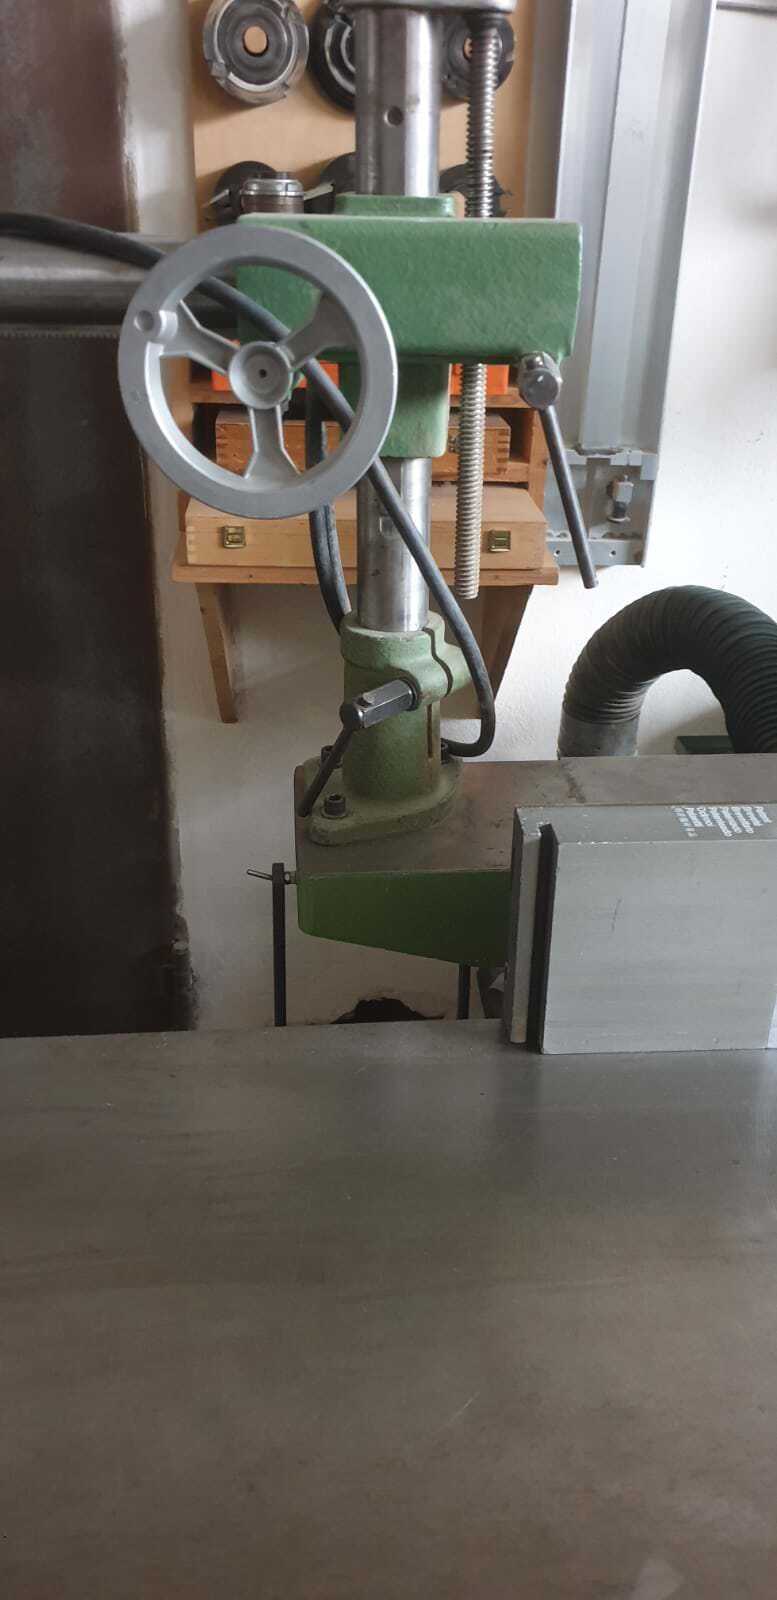 Martin Swivel Spindle Moulder with feed unit and positioning control - second-hand T25 (7)